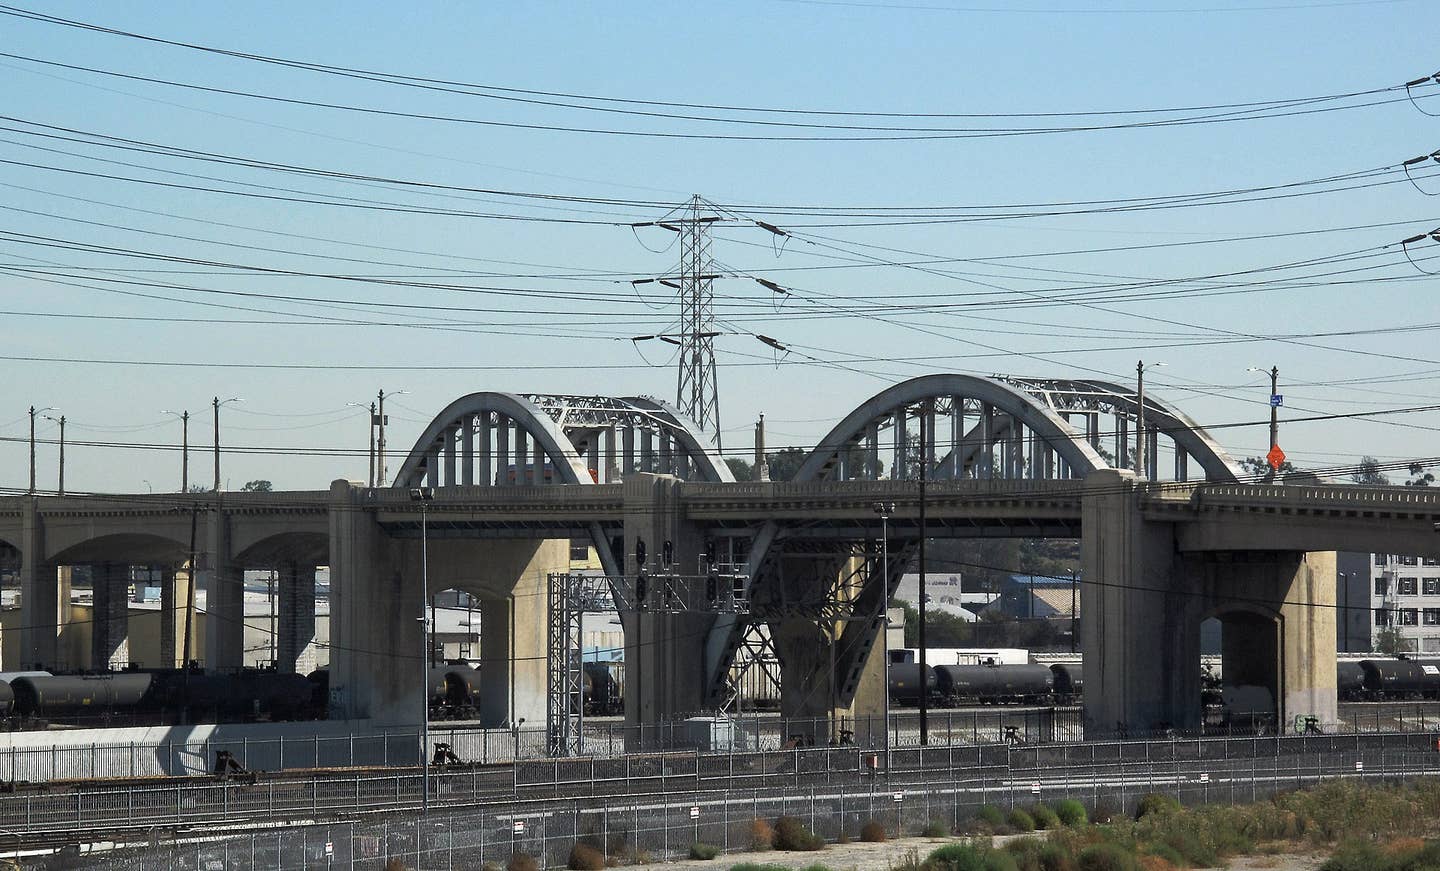 The original Sixth Street Viaduct, pictured shortly before its demolition in 2016. <em><a href="https://en.wikipedia.org/wiki/Sixth_Street_Viaduct#/media/File:Sixth_Street_Bridge_over_Los_Angeles_River.jpg">Downtowngal</a>, CC-BY-SA-3.0</em>